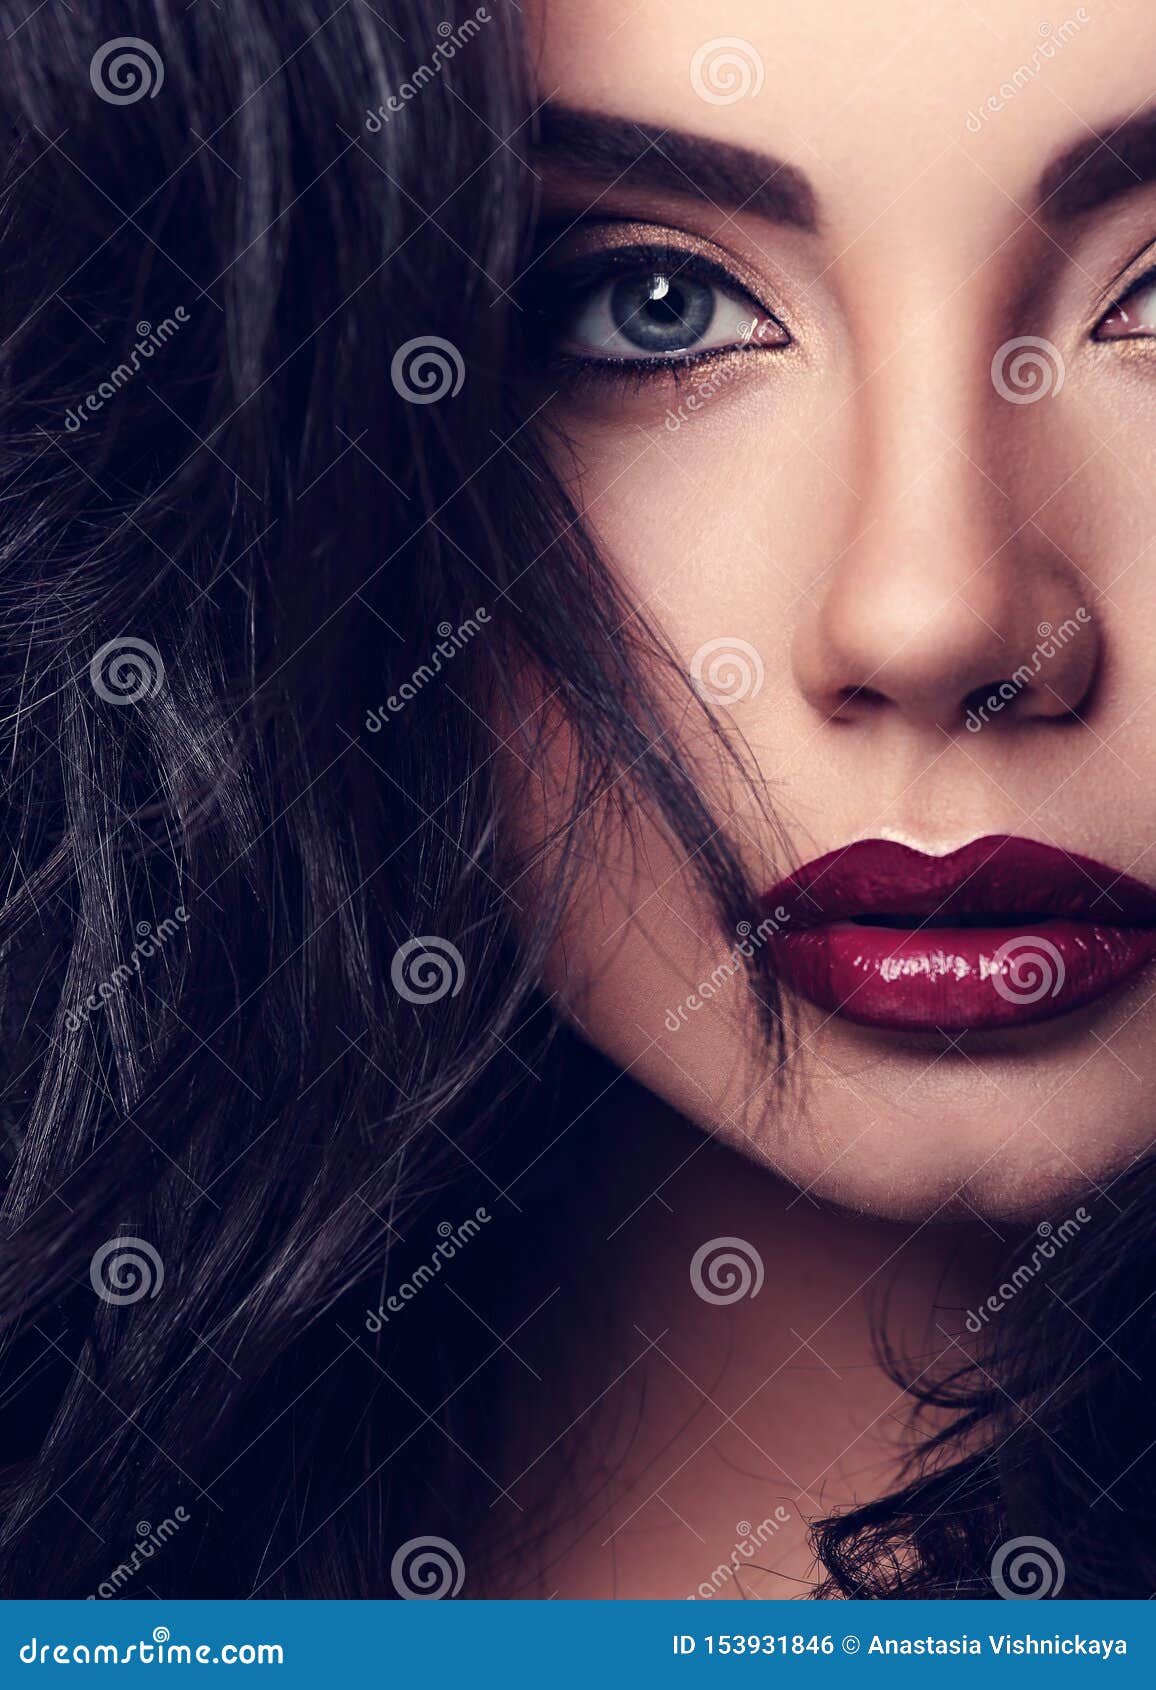 Beautiful Bright Makeup Woman With Long Black Curly Hair